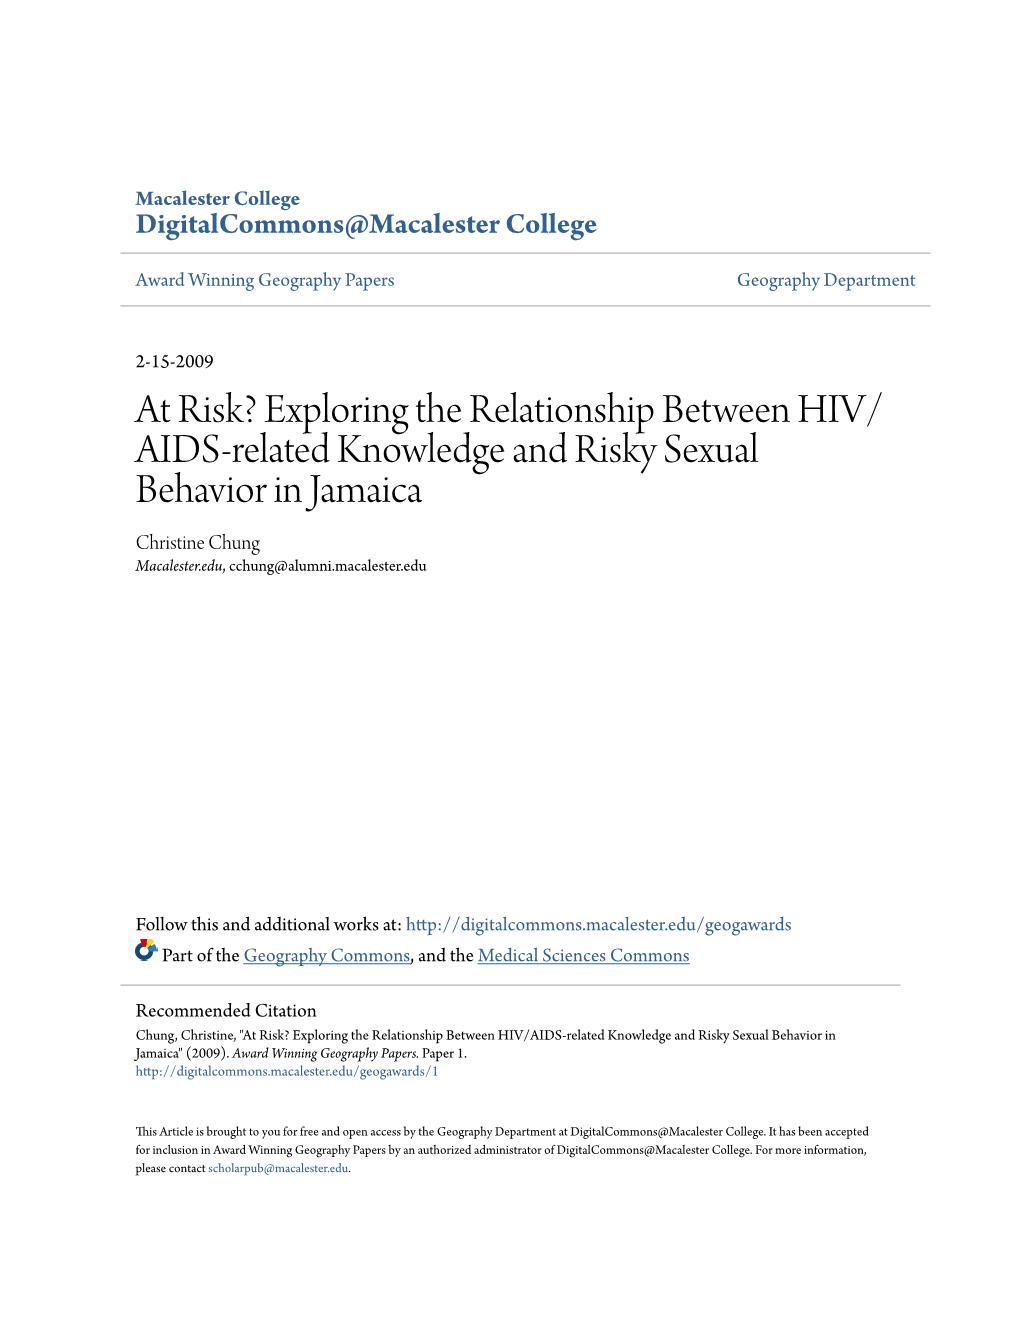 At Risk? Exploring the Relationship Between HIV/AIDS-Related Knowledge and Risky Sexual Behavior in Jamaica" (2009)